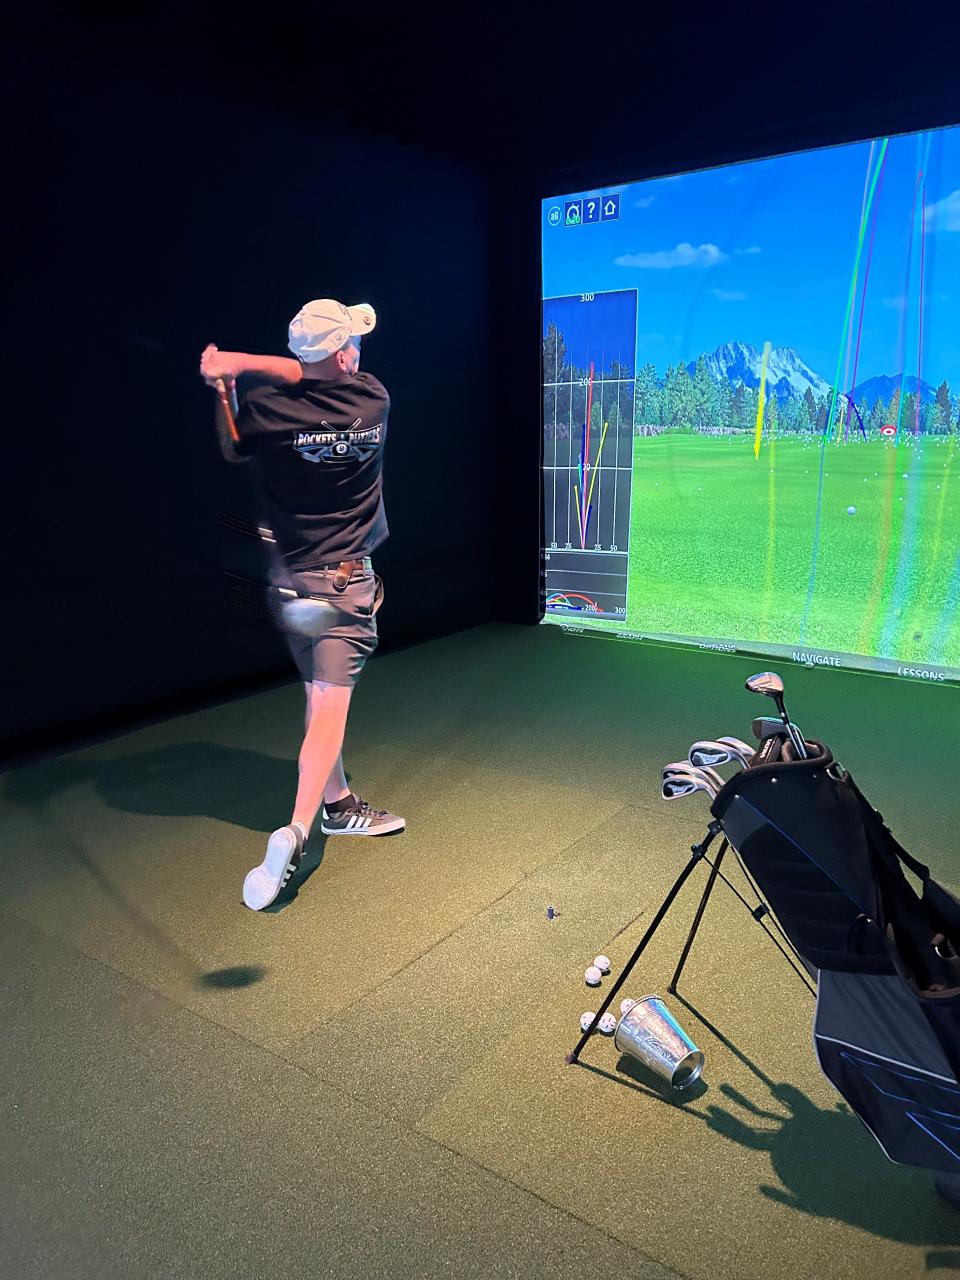 Sonny Barrett, owner of Pockets & Putters in Rockledge, demonstrates how the golf simulator works.